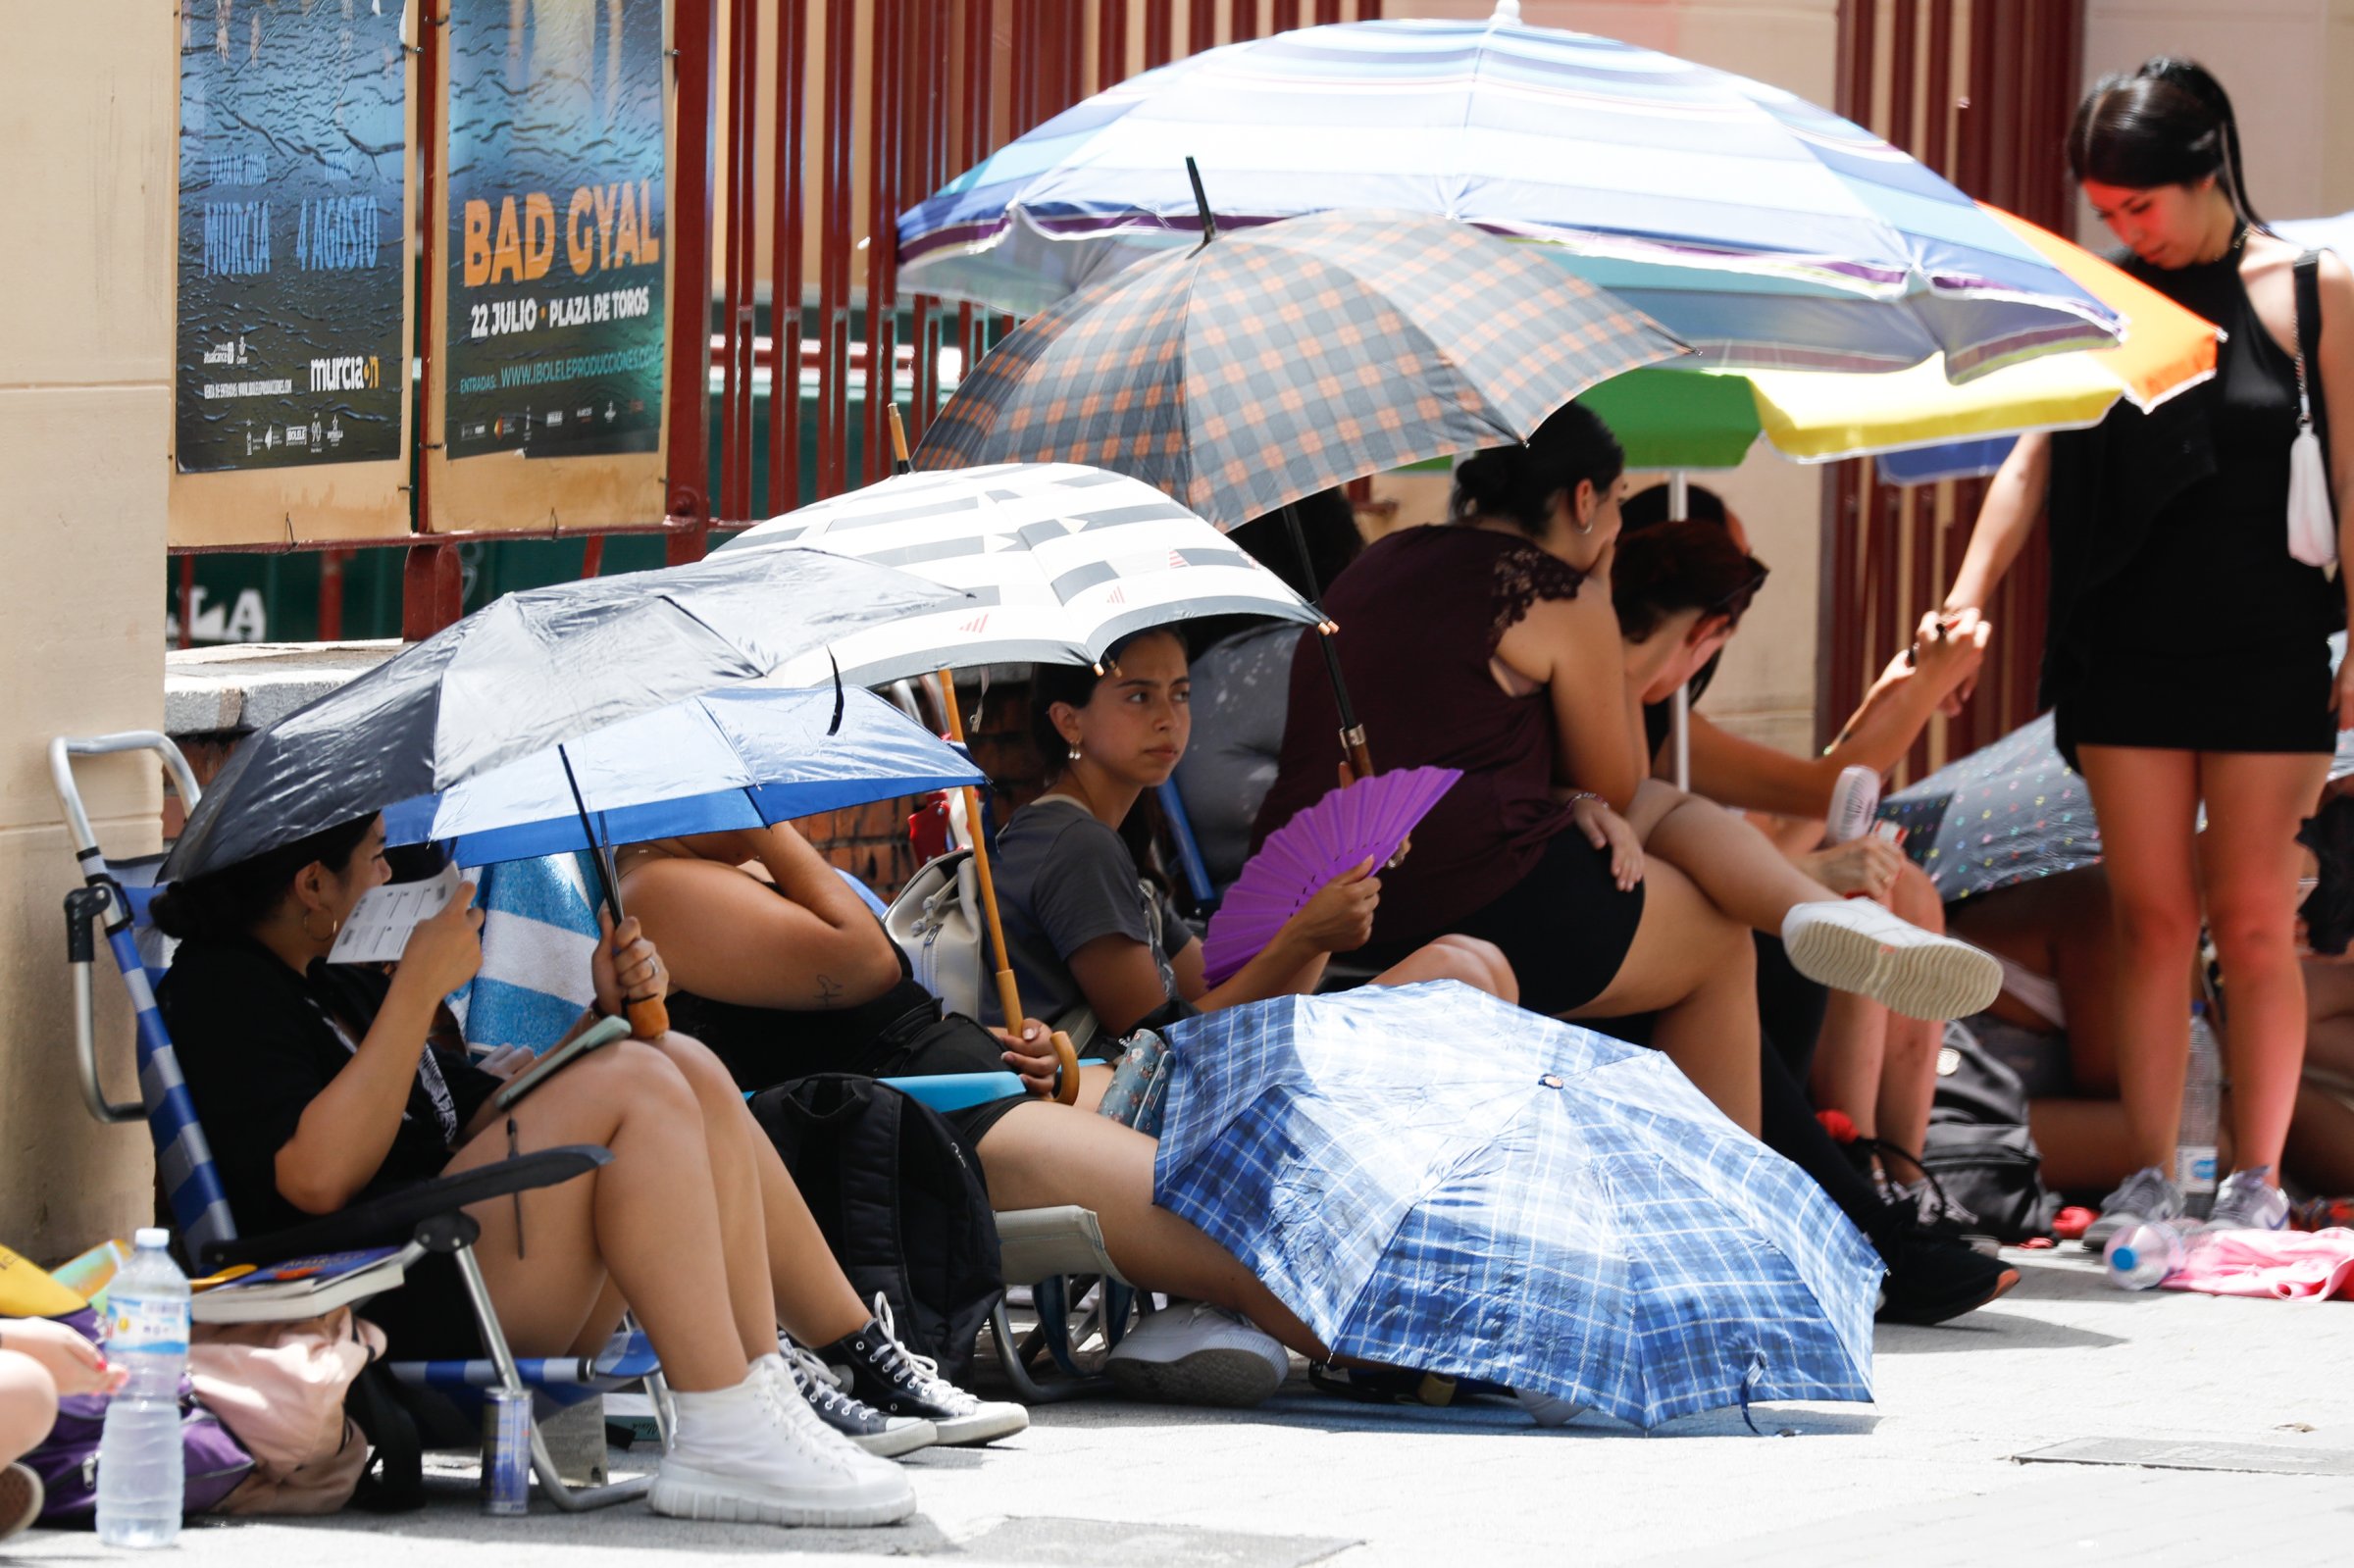 People take shelter from the heat under umbrellas, in Murcia, Spain.